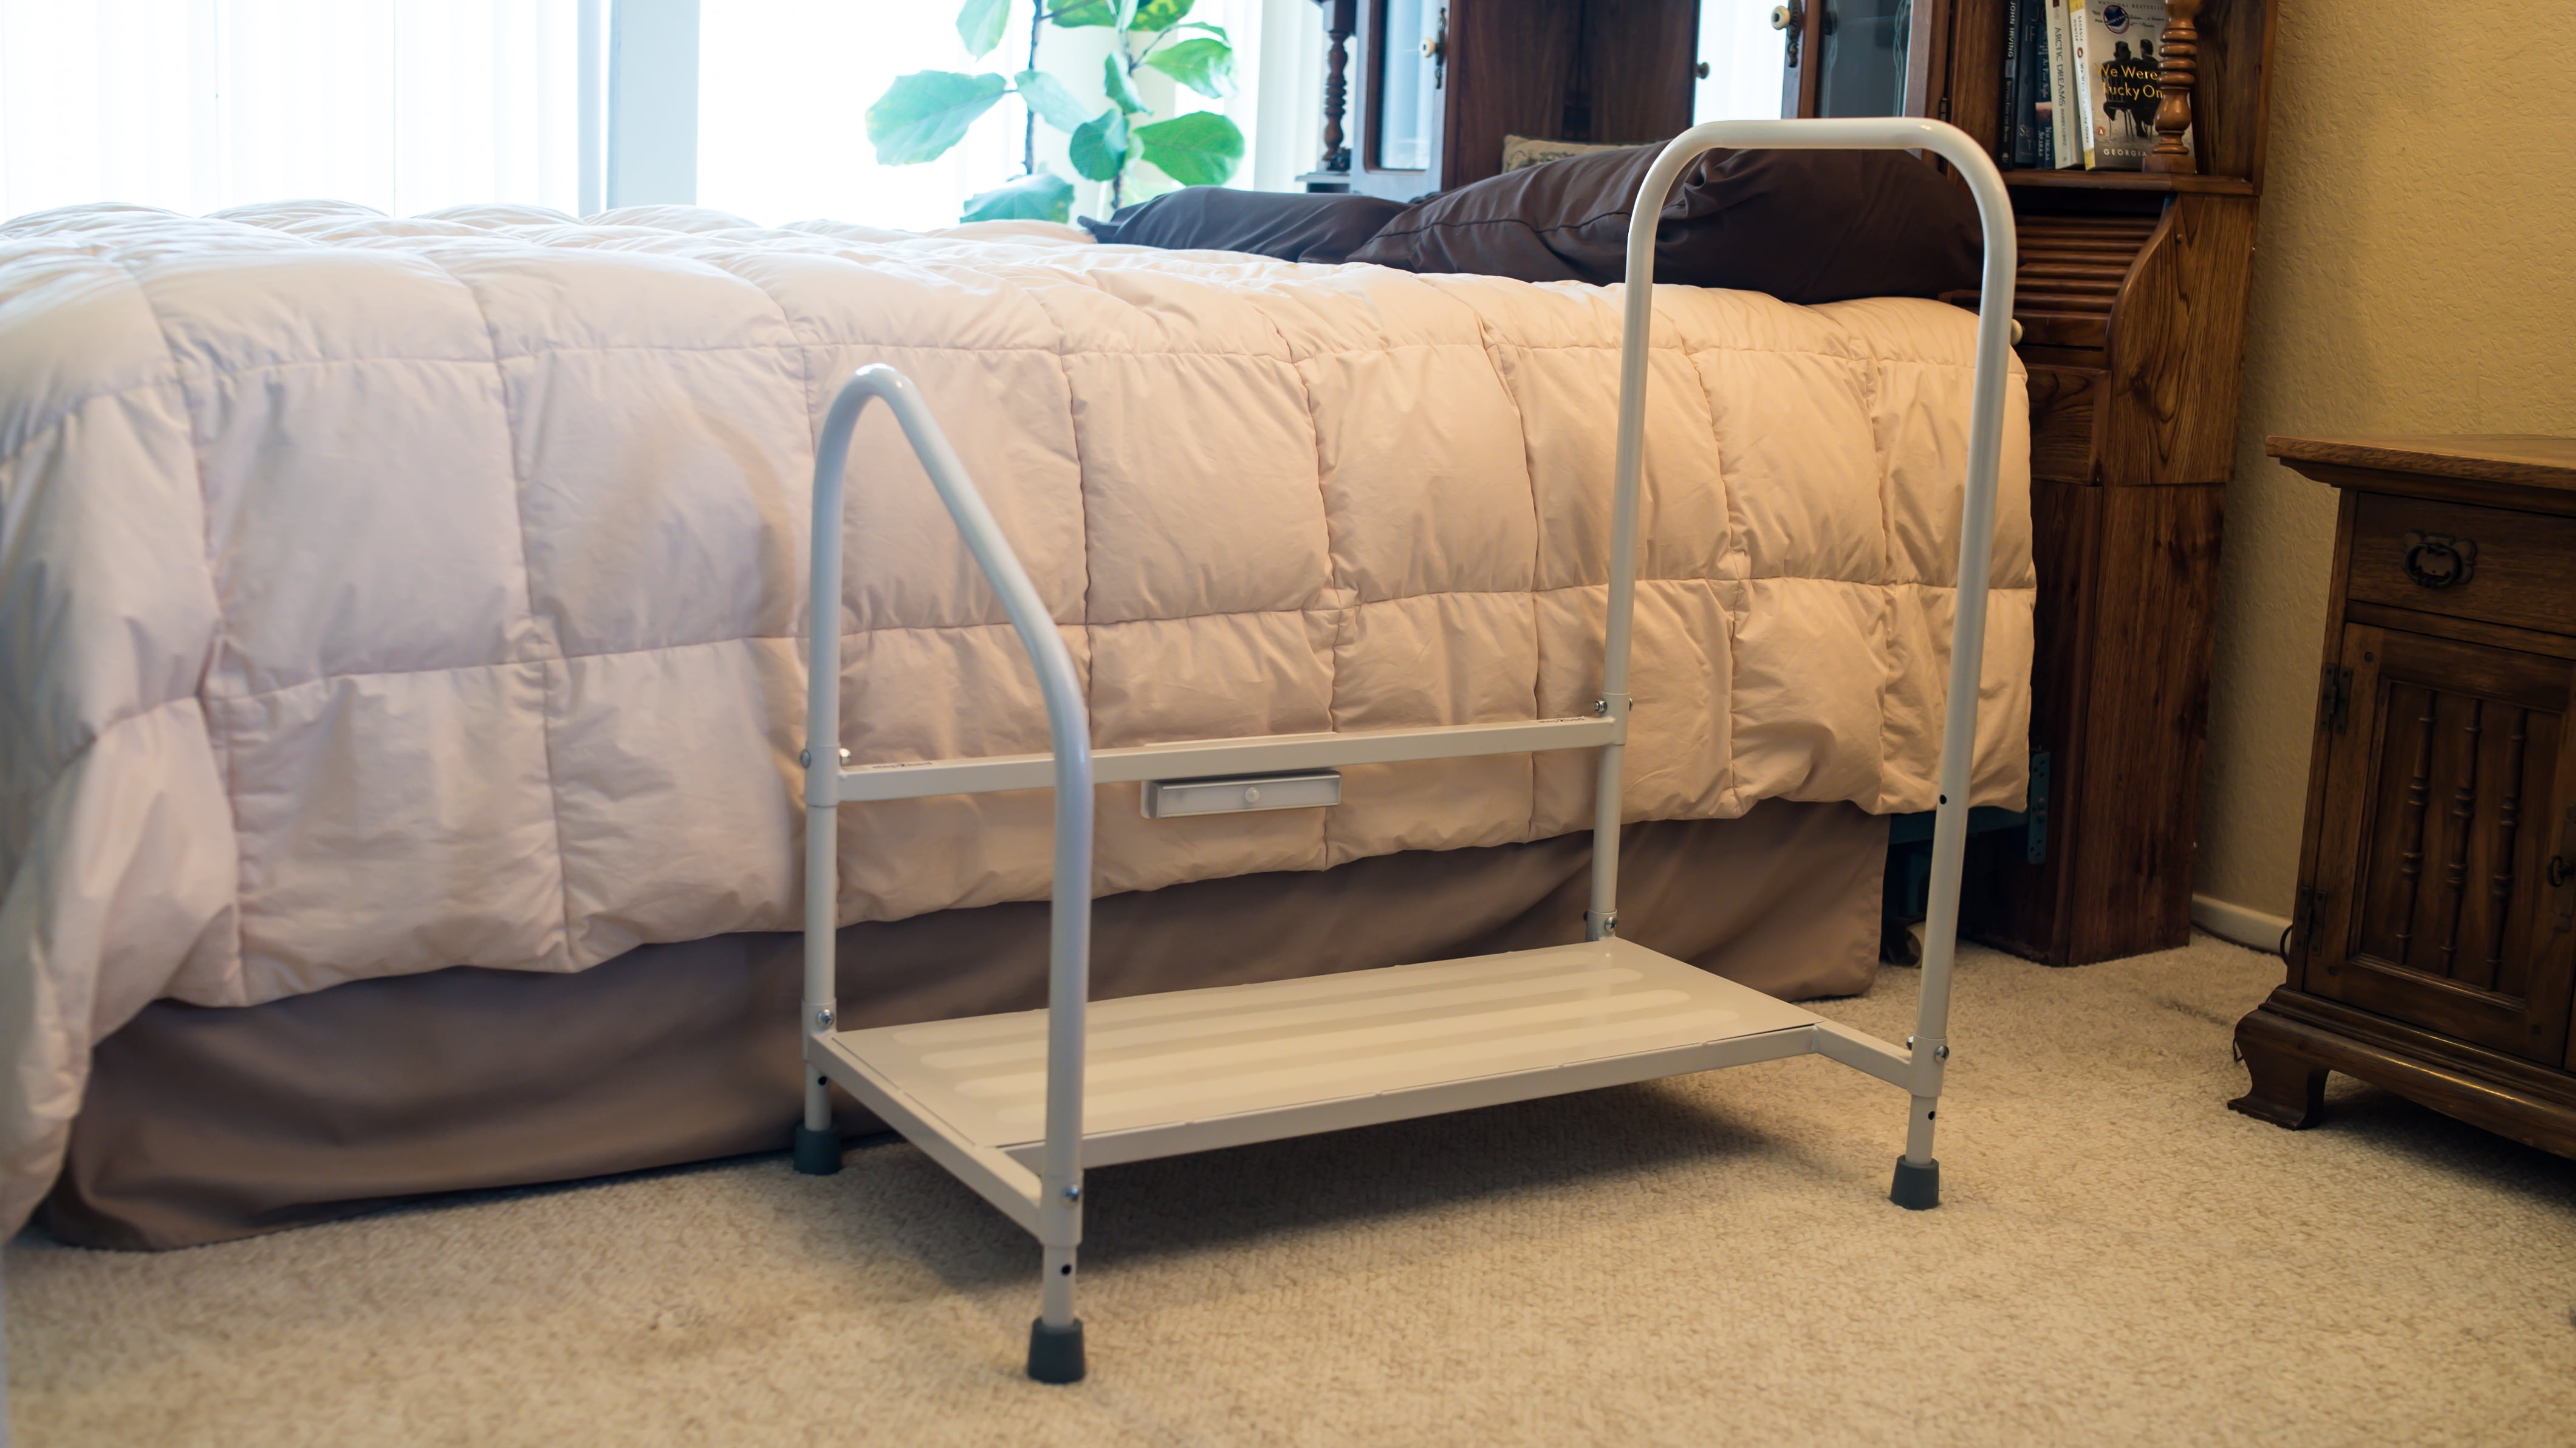 Bed Steps for High Beds for Adults Step Stool for Bedside 3-in-1